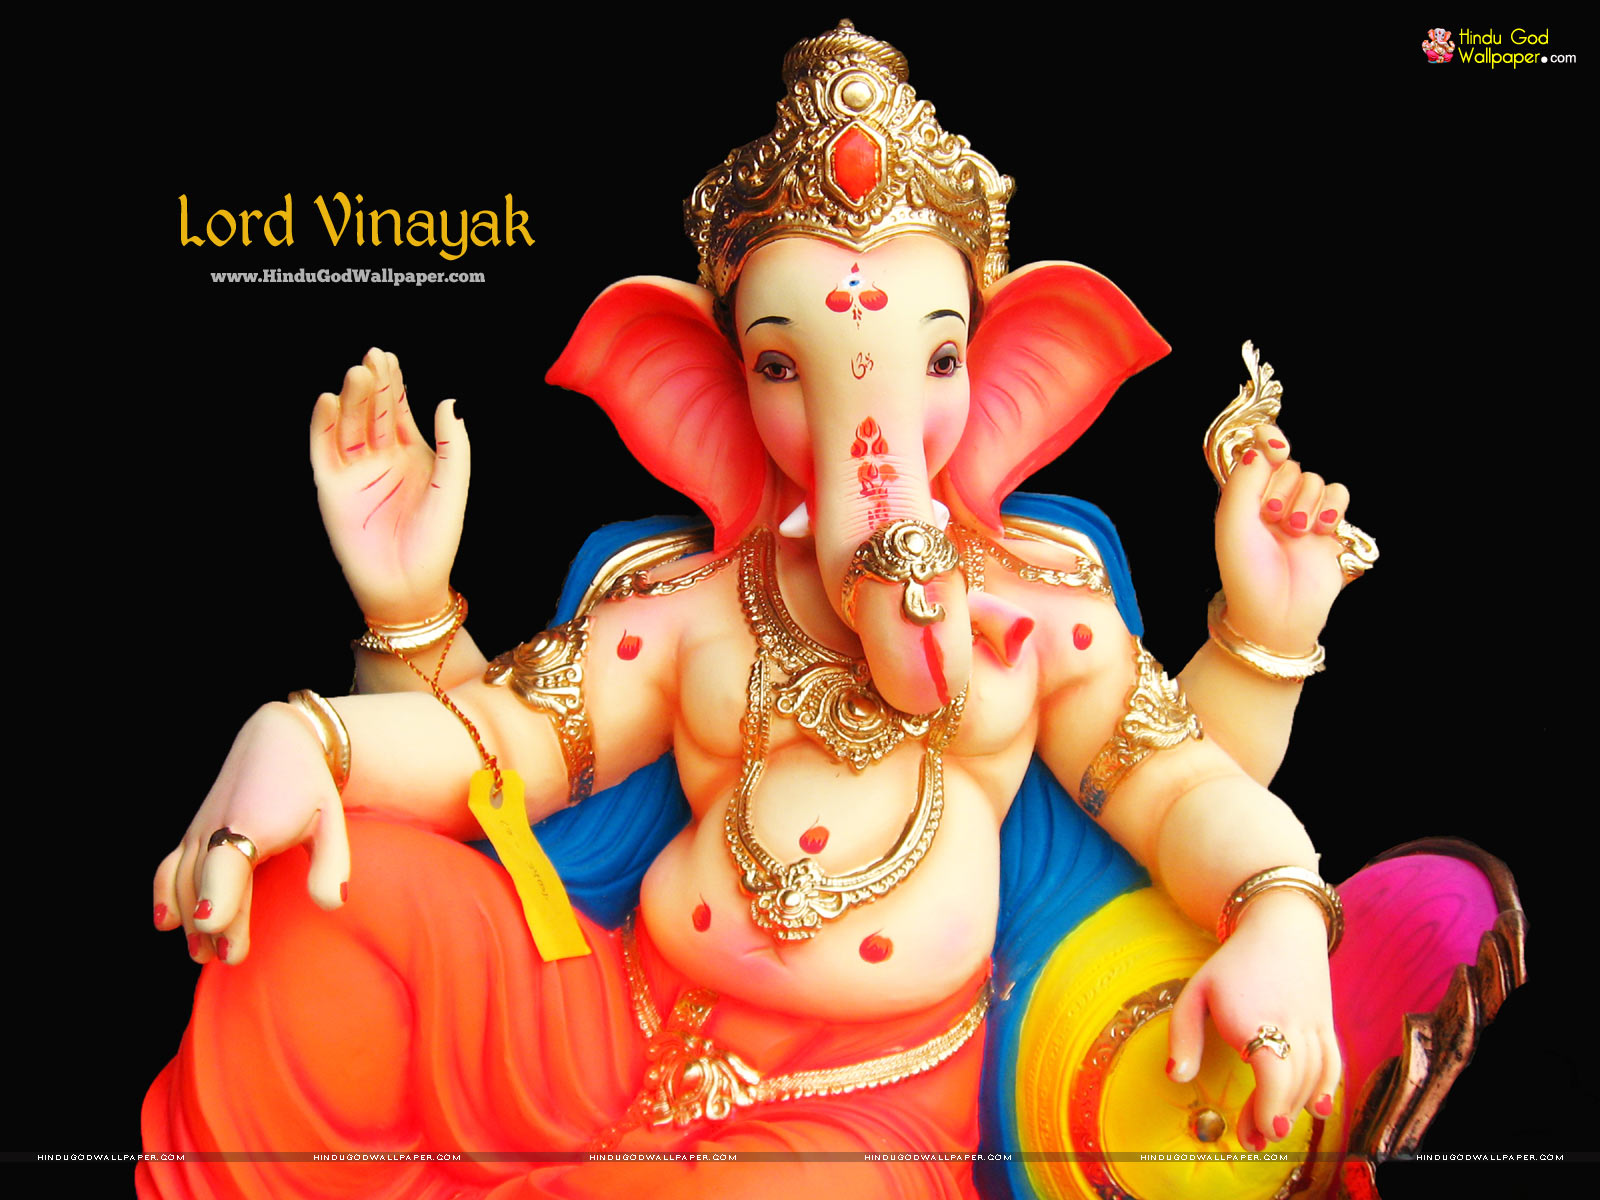 Lord Vinayak Wallpapers, Pictures & Images Free Download